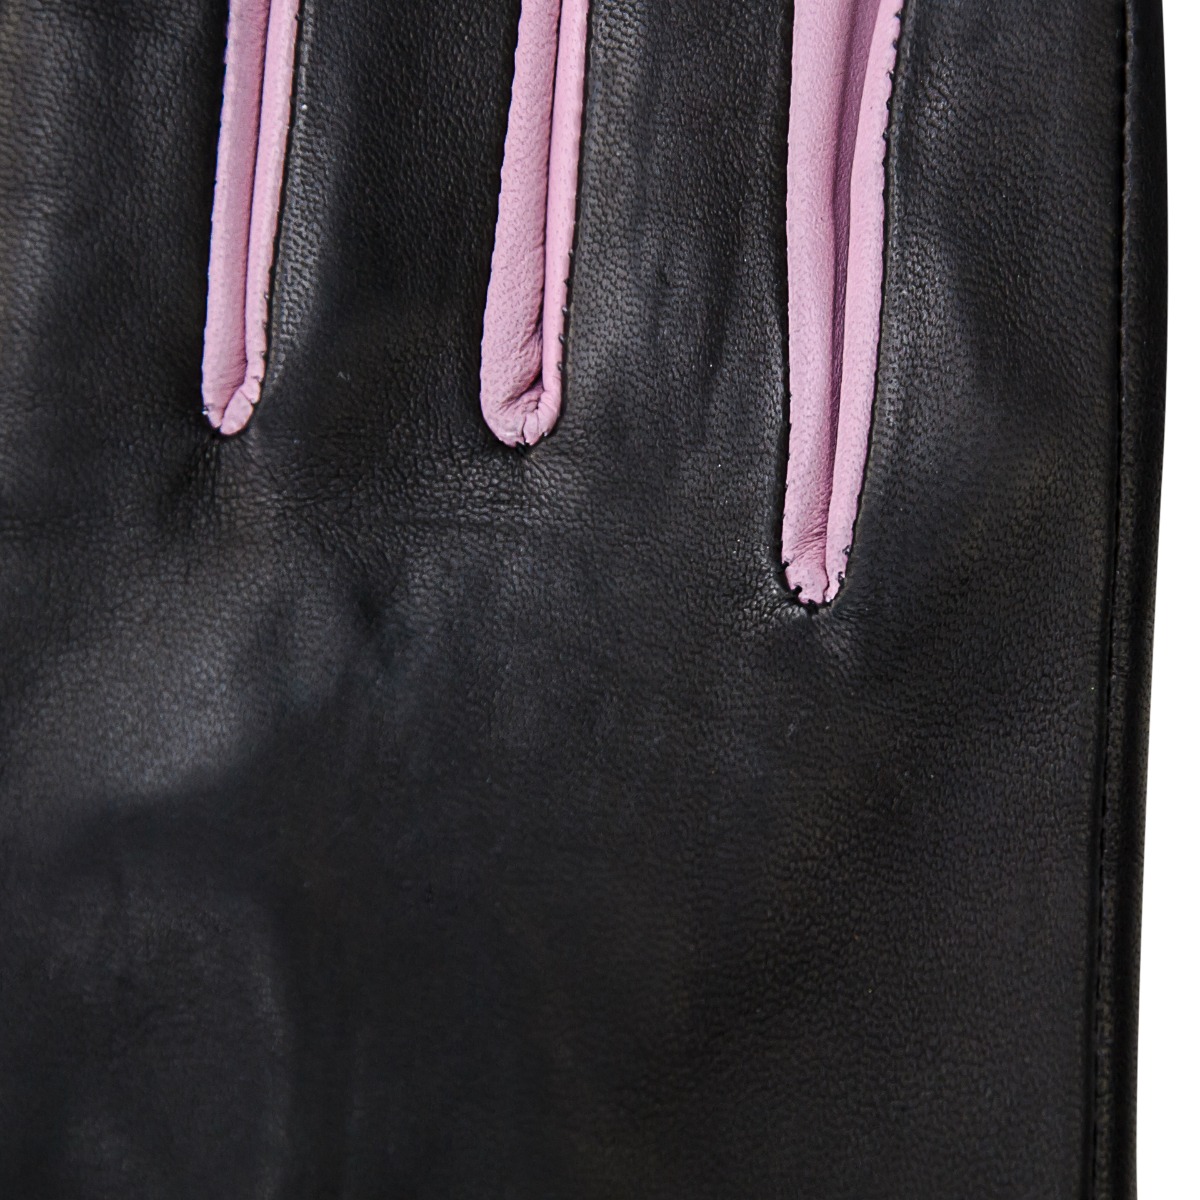 Leather gloves XL - Allora image 3